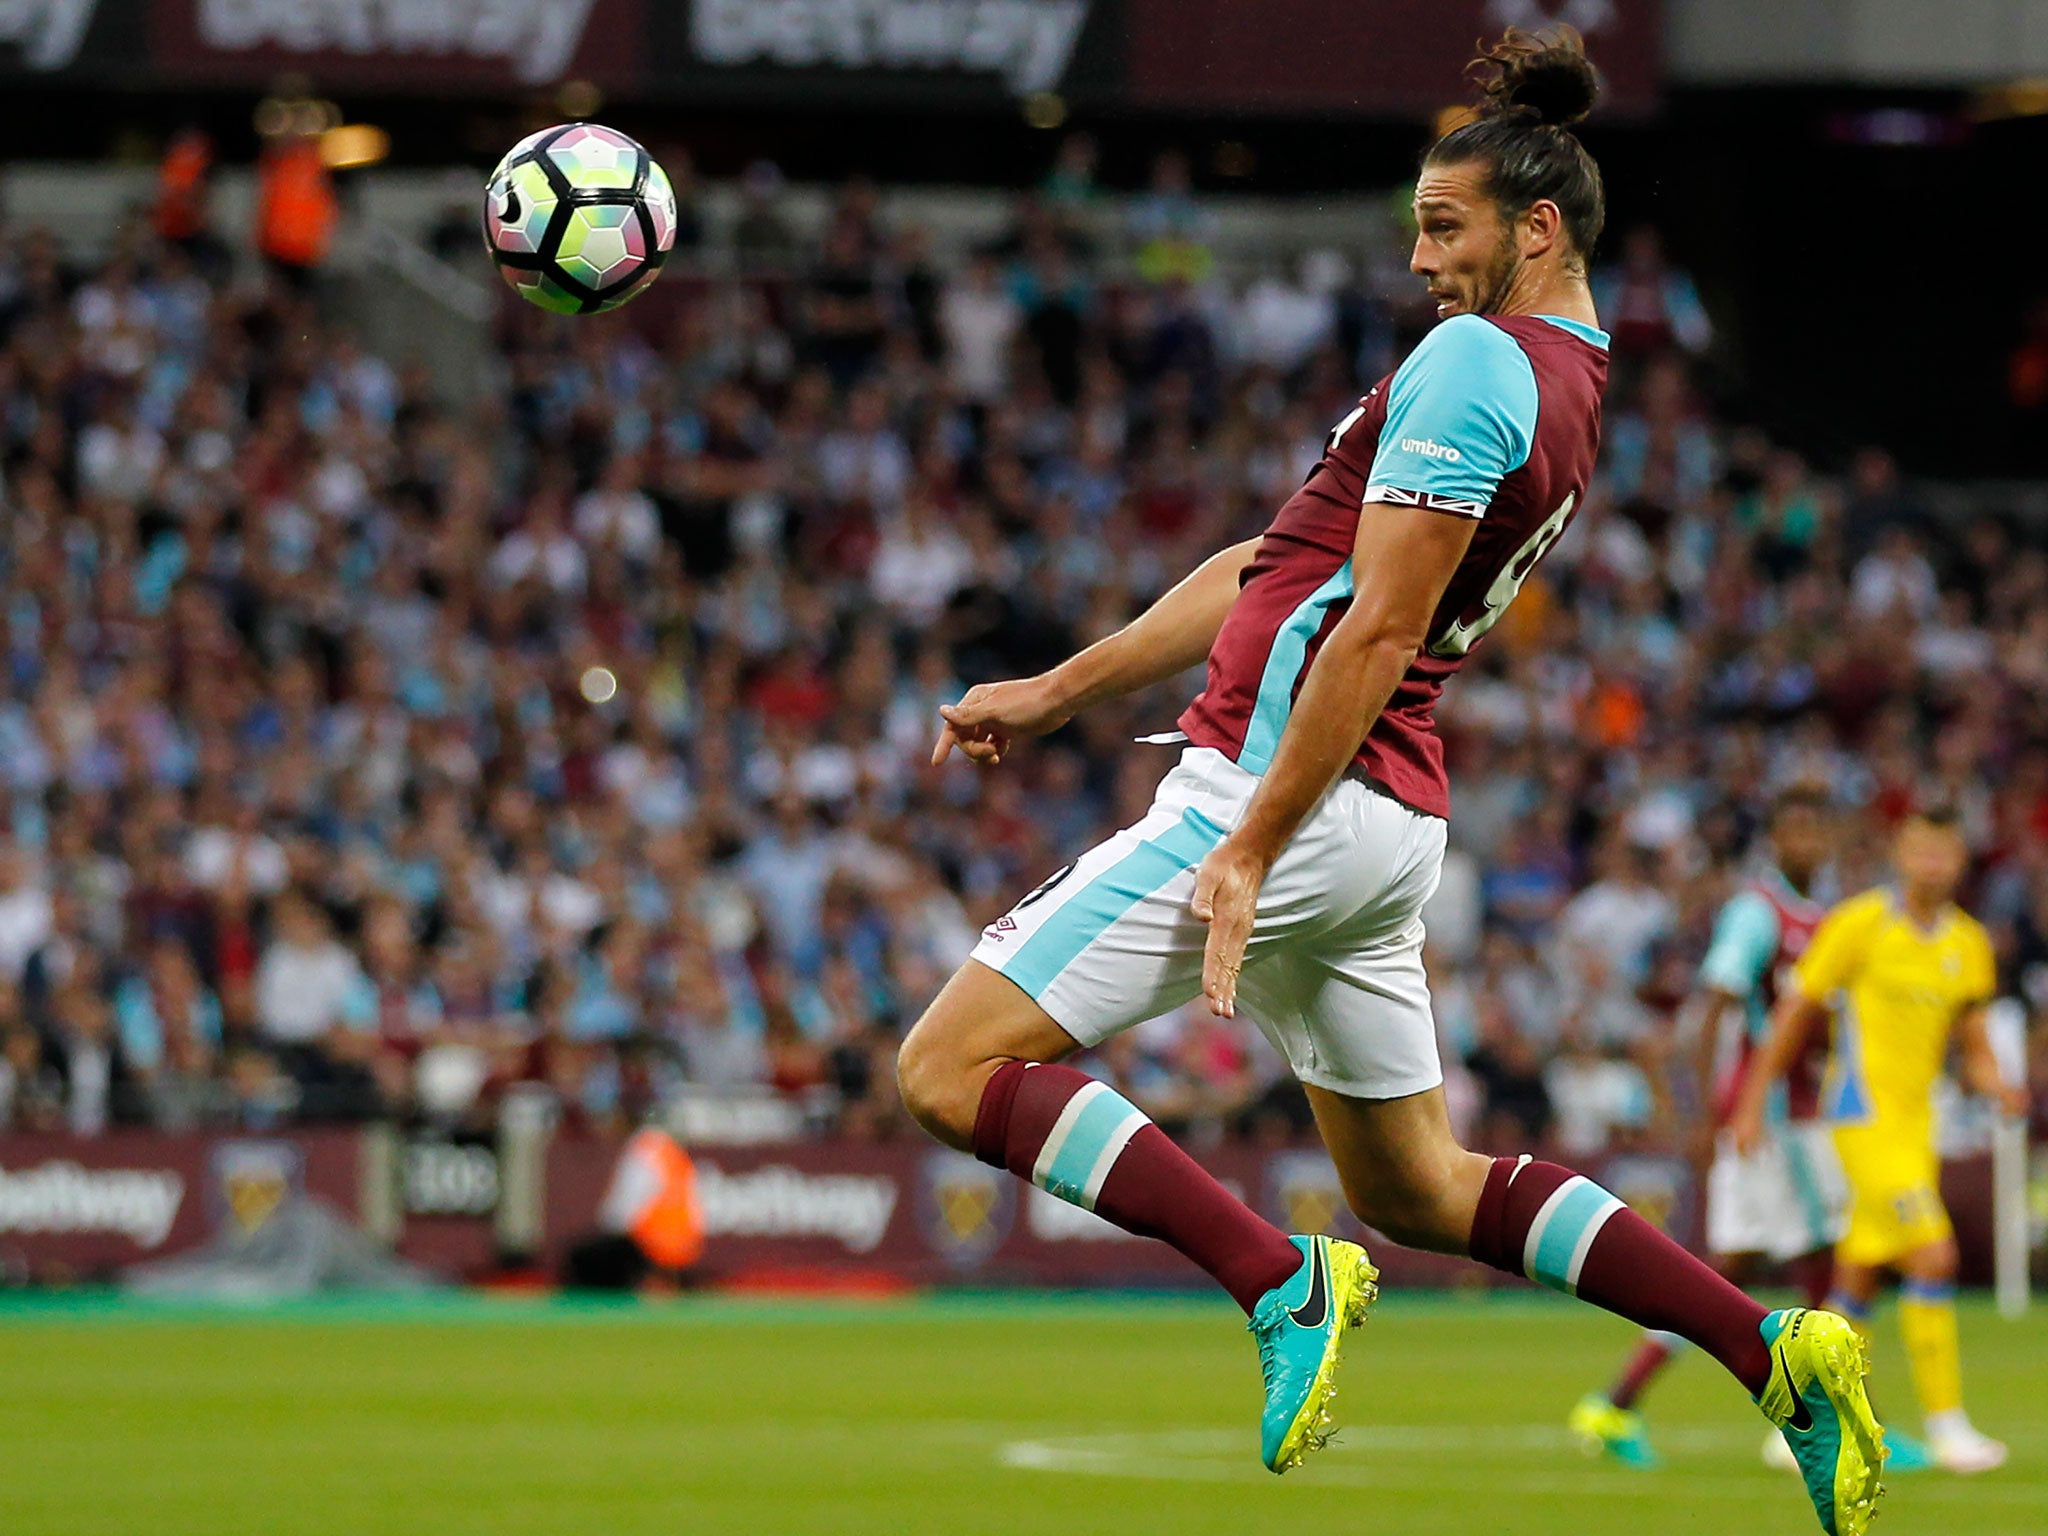 The West Ham forward was praised by his manager as 'brave'